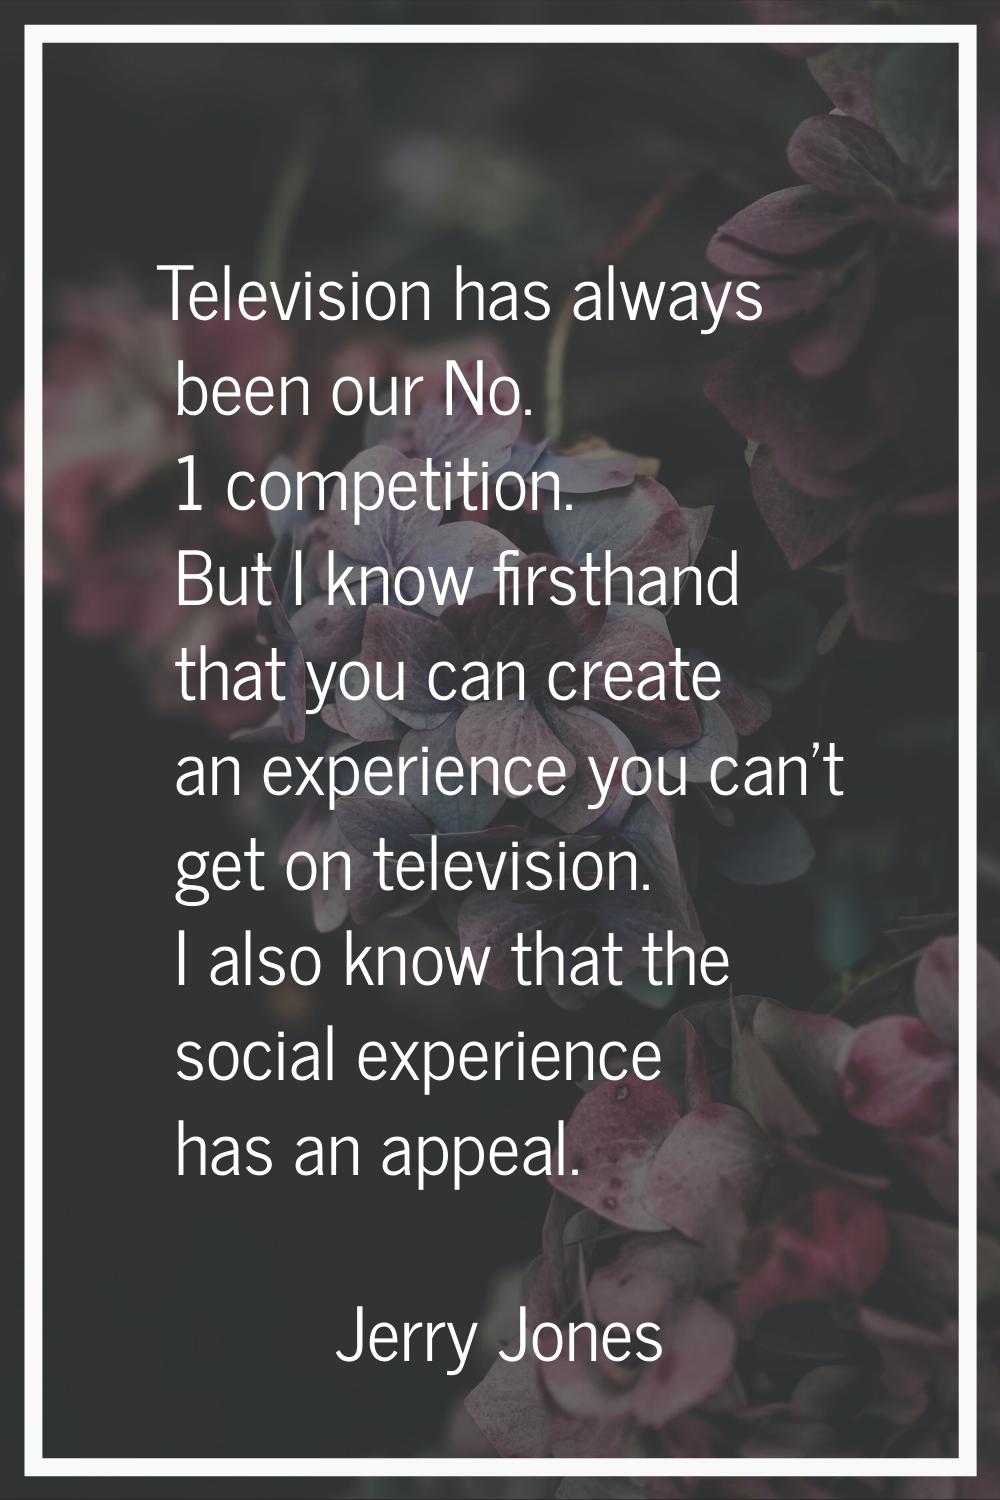 Television has always been our No. 1 competition. But I know firsthand that you can create an exper